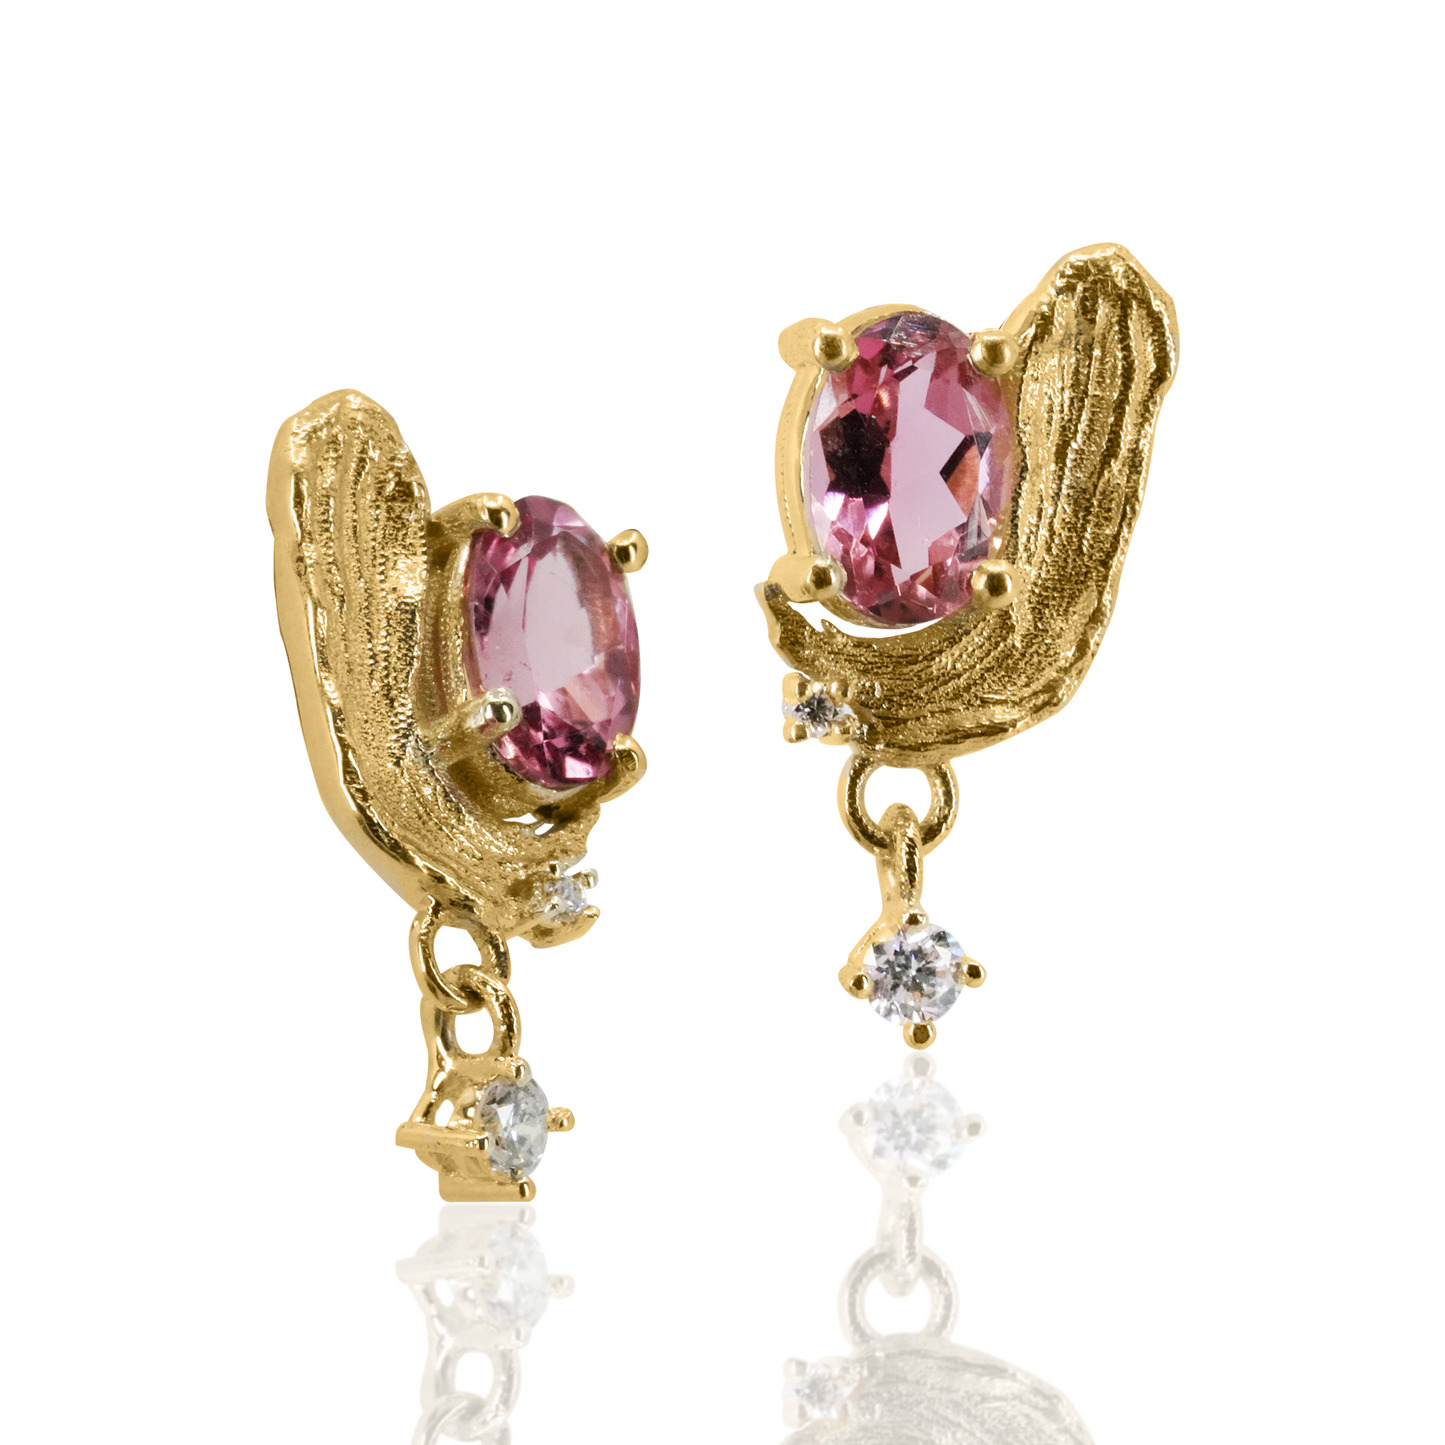 Rose Madder Stud Earrings with Pink Tourmaline and Diamond - PAIR